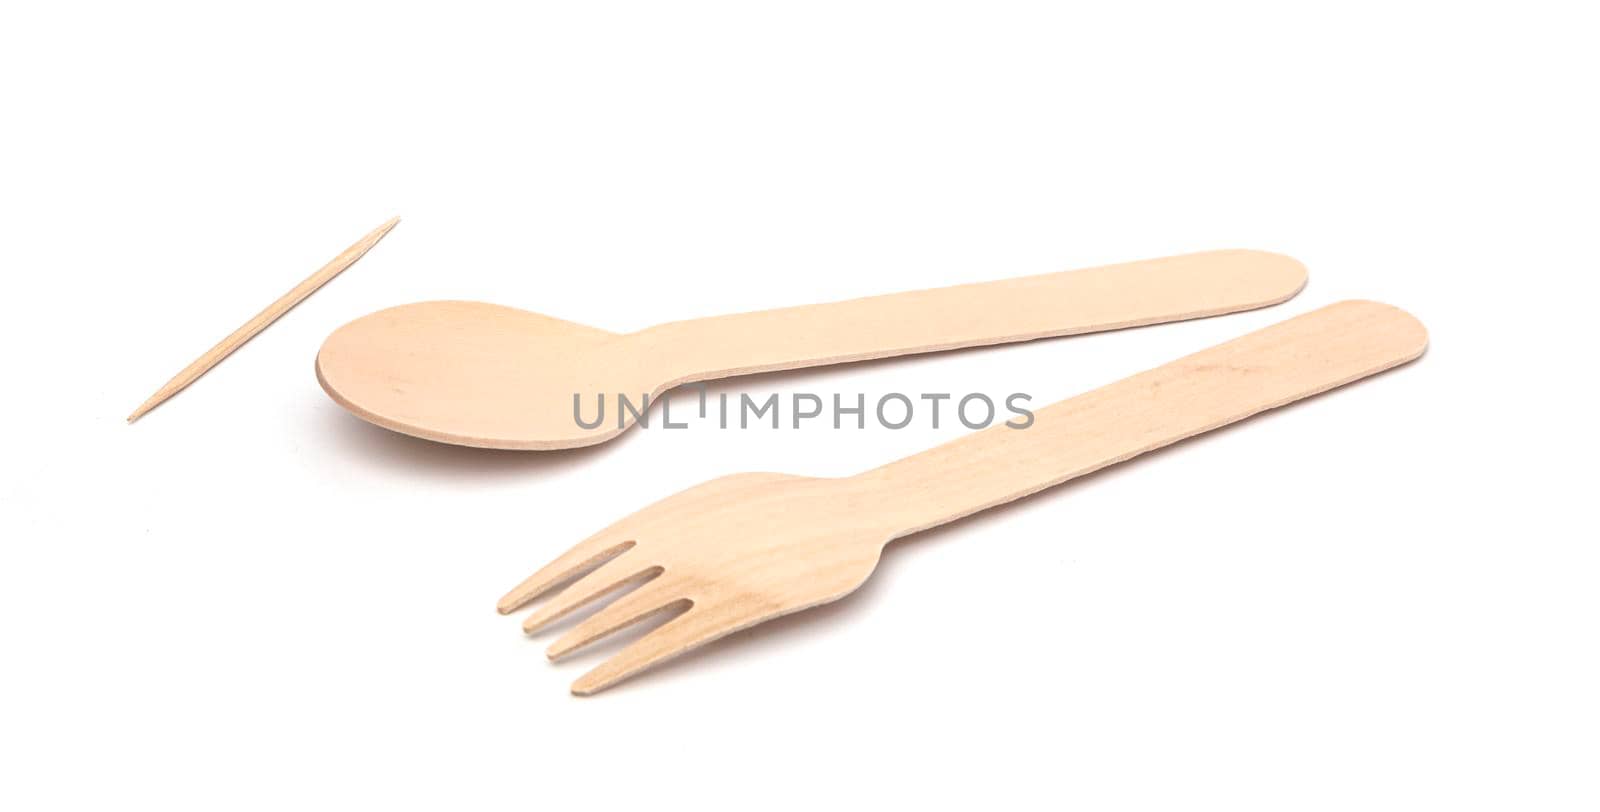 Wooden spoon and fork isolated on white background with clipping path.